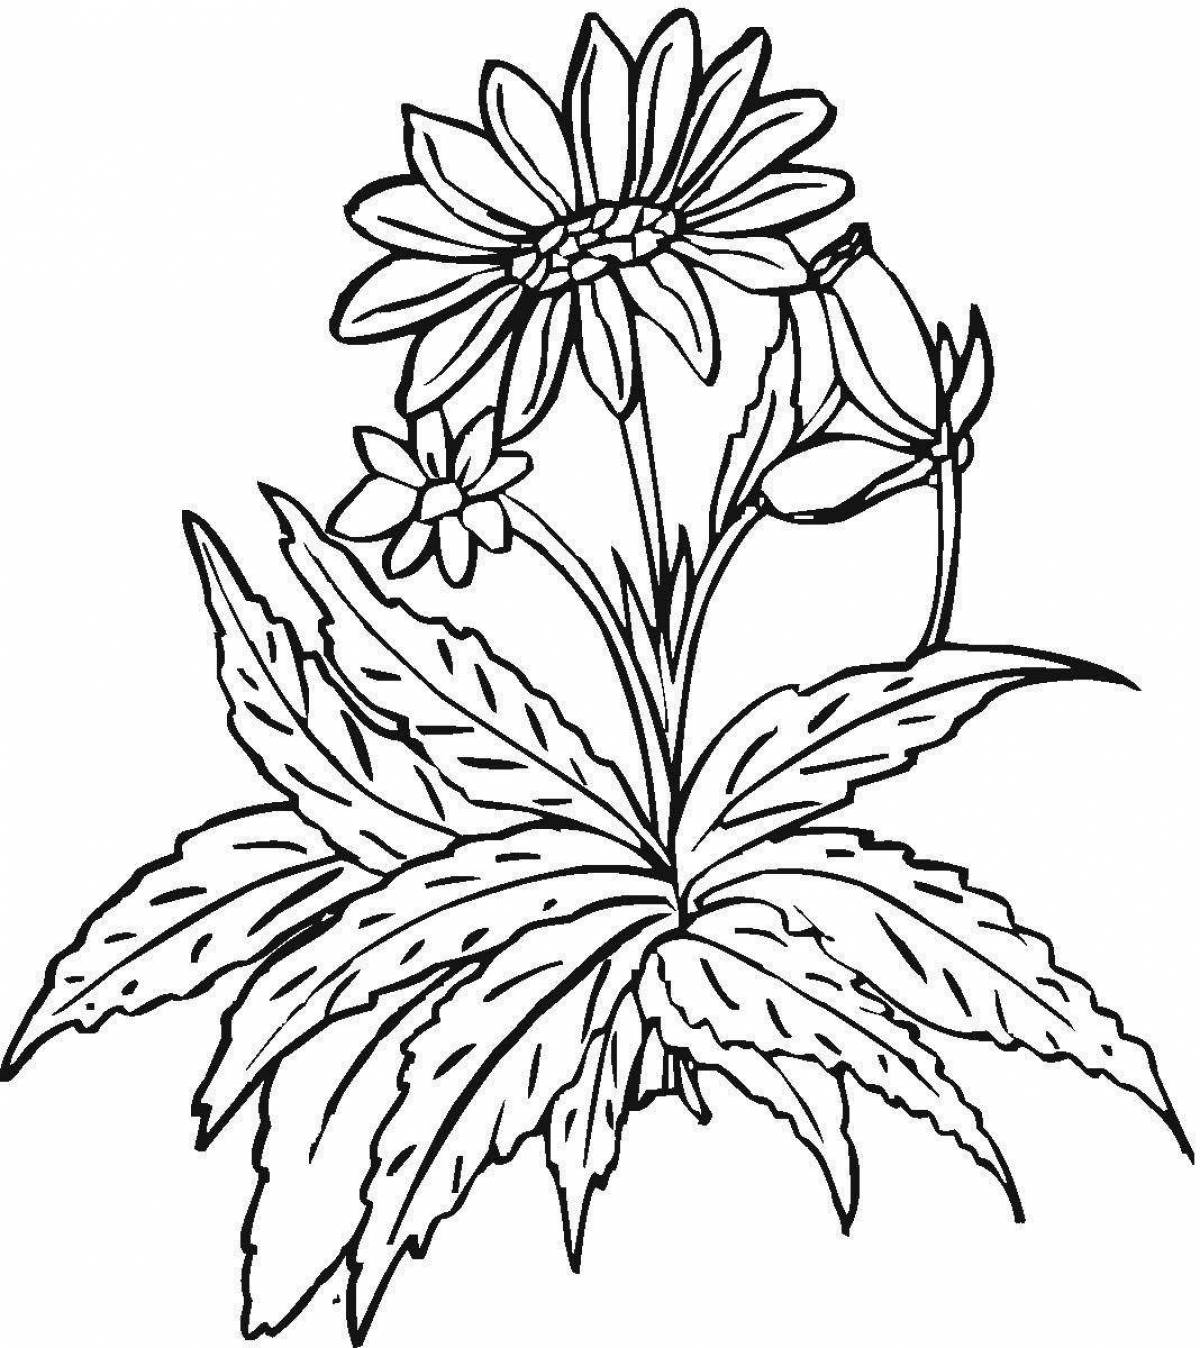 Coloring page peaceful azure flower